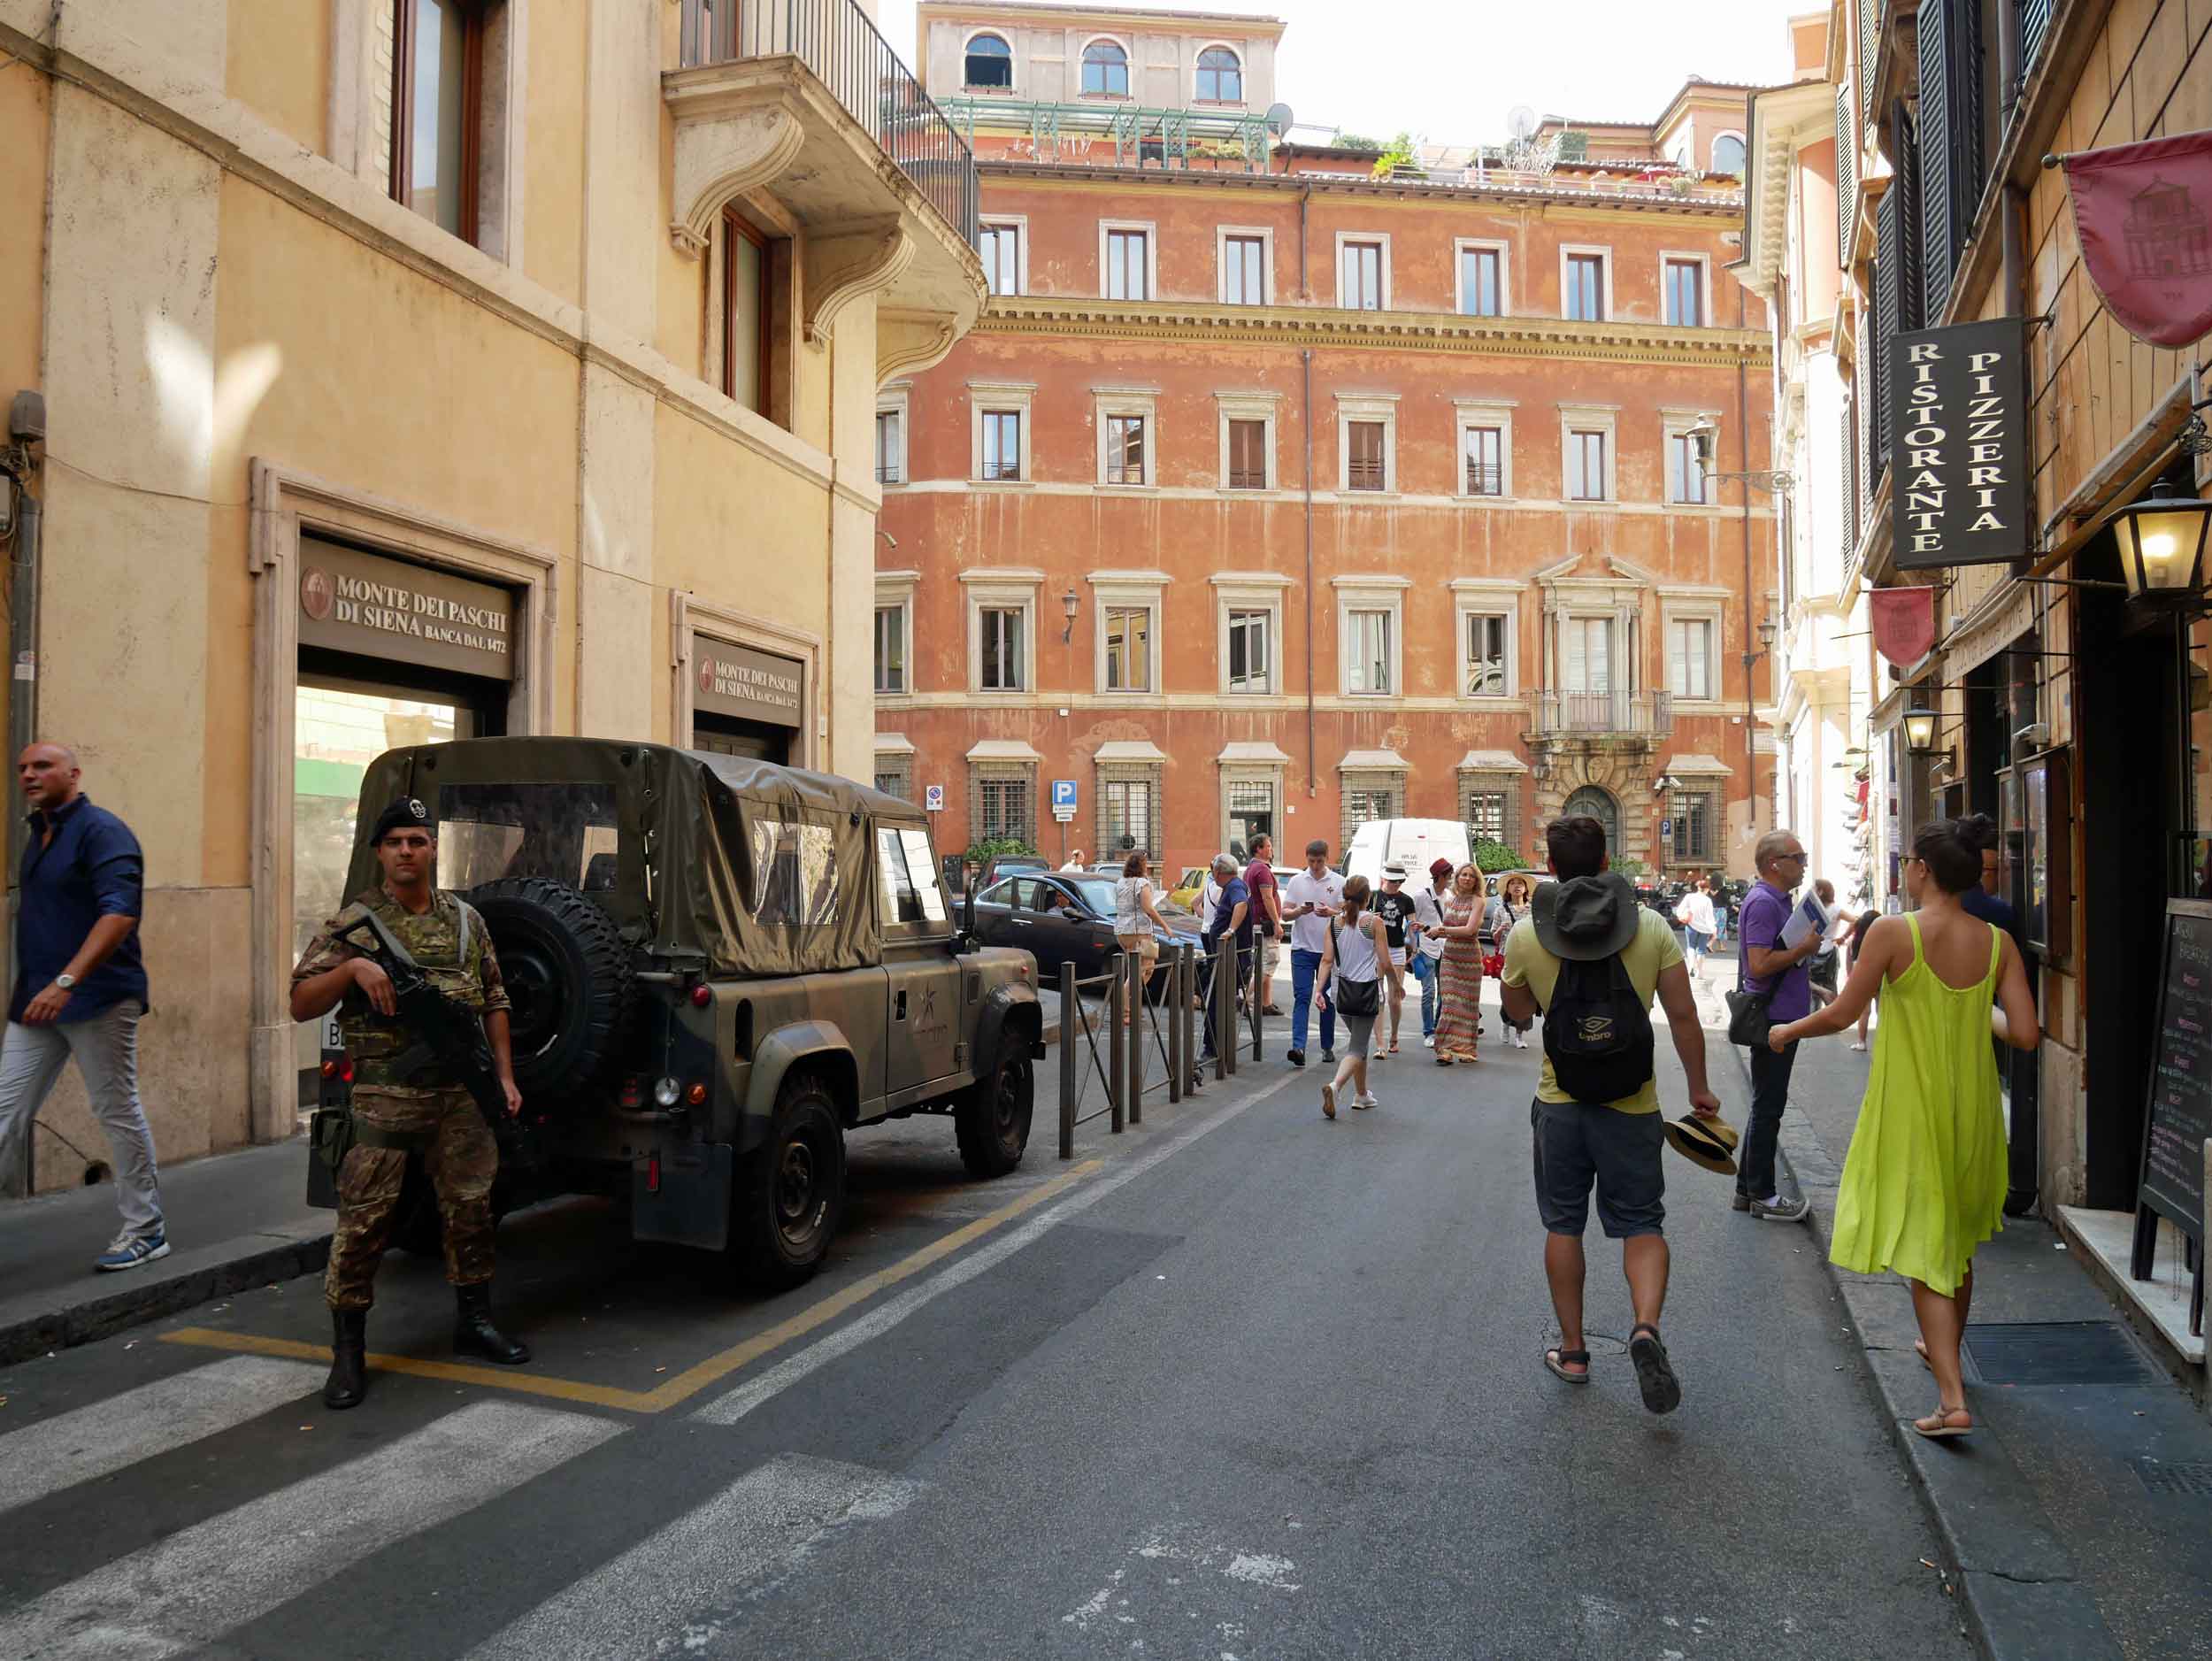  A common sight given the unfortunate events of today's world, Italian military lined the streets along the city's tourist zones.&nbsp; 